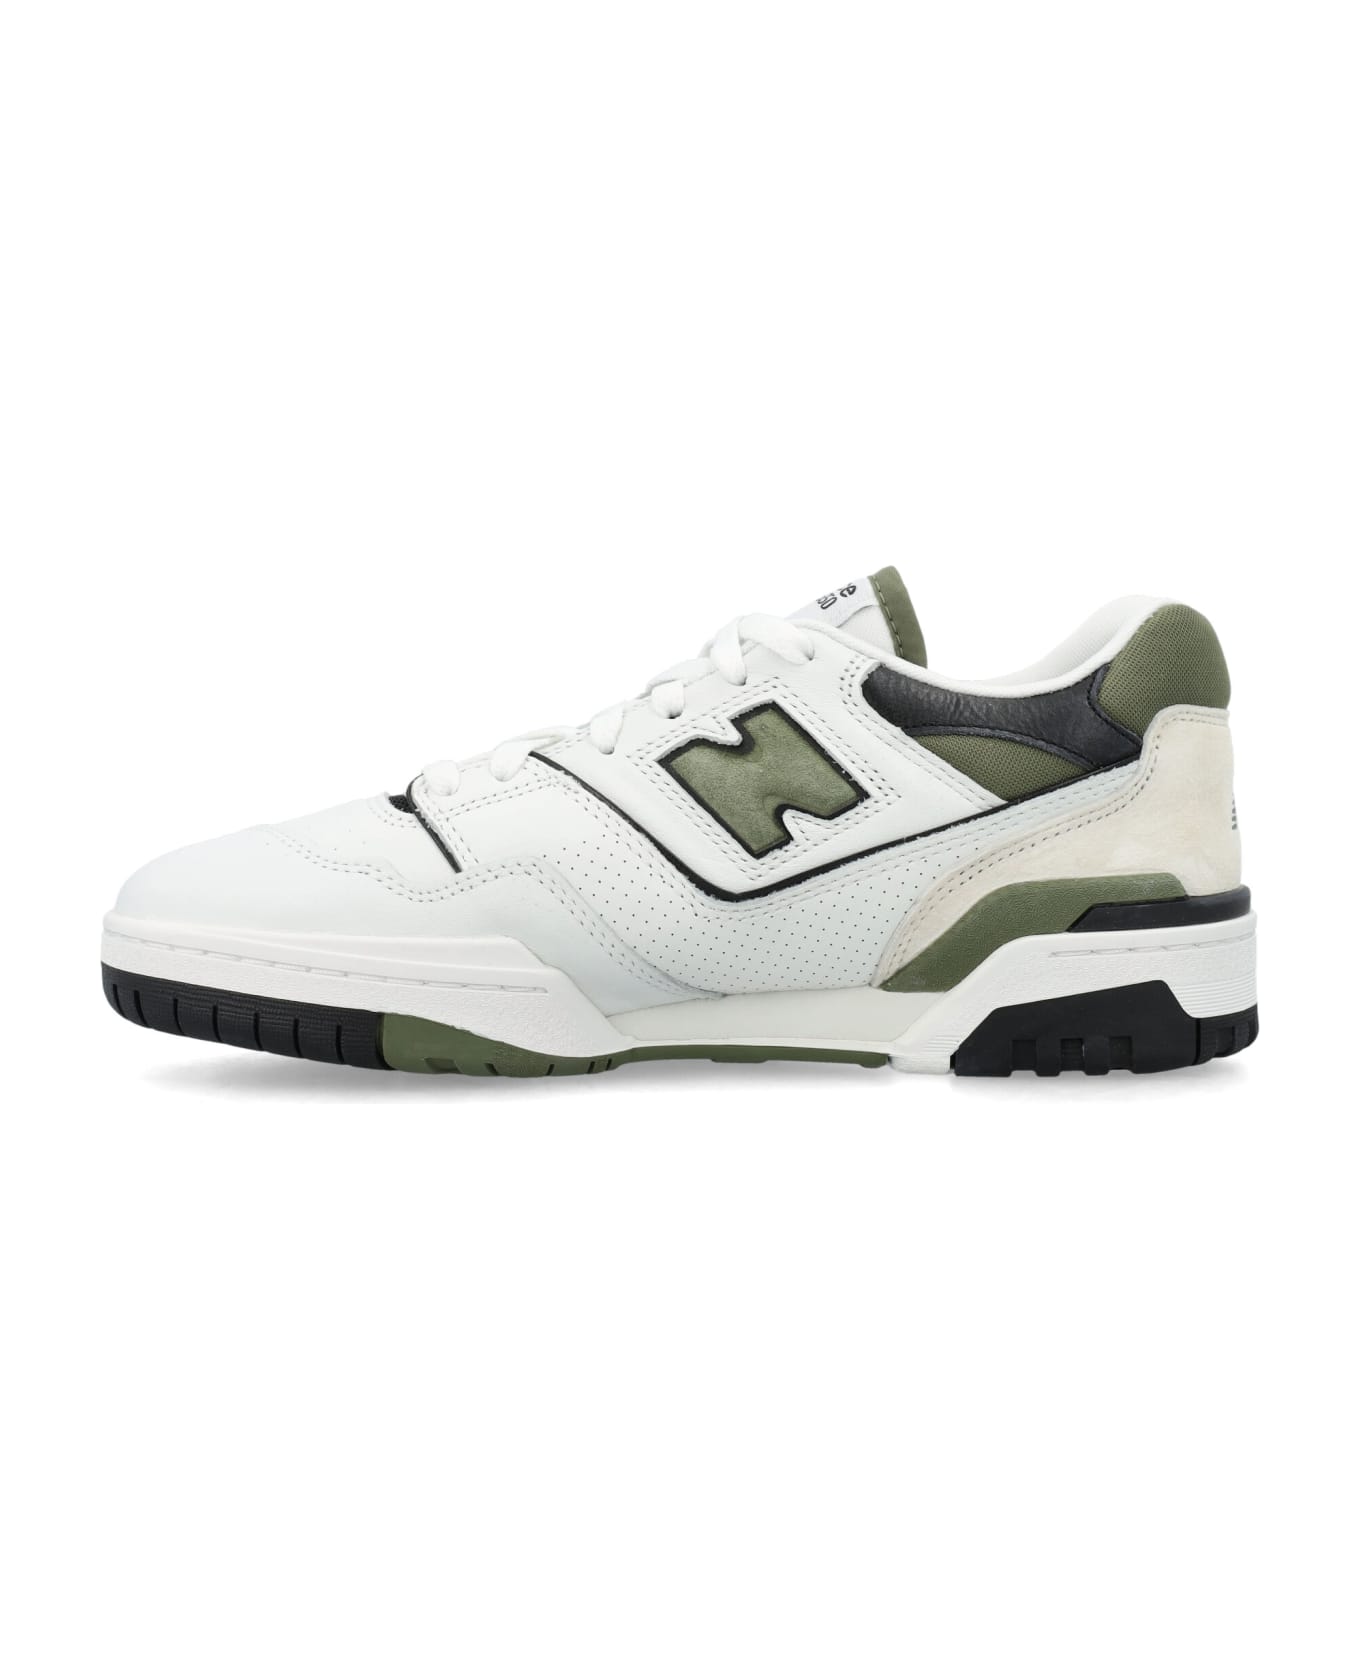 New Balance 550 Sneakers - WHITE OLIVE